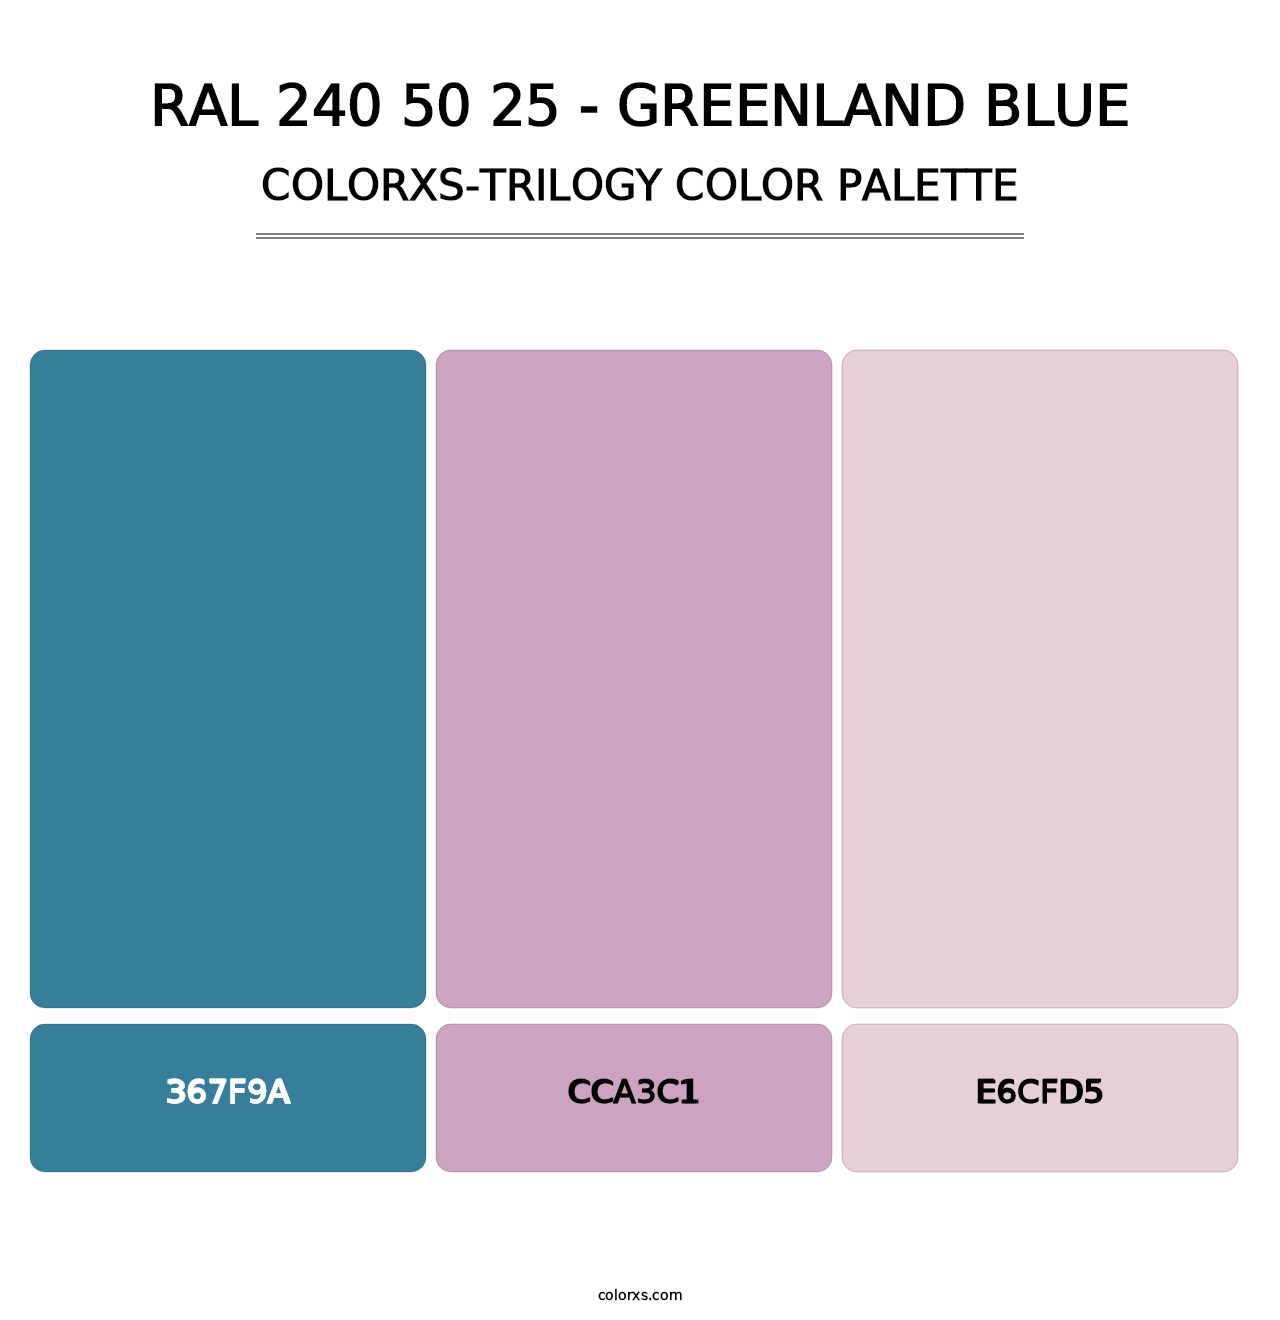 RAL 240 50 25 - Greenland Blue - Colorxs Trilogy Palette